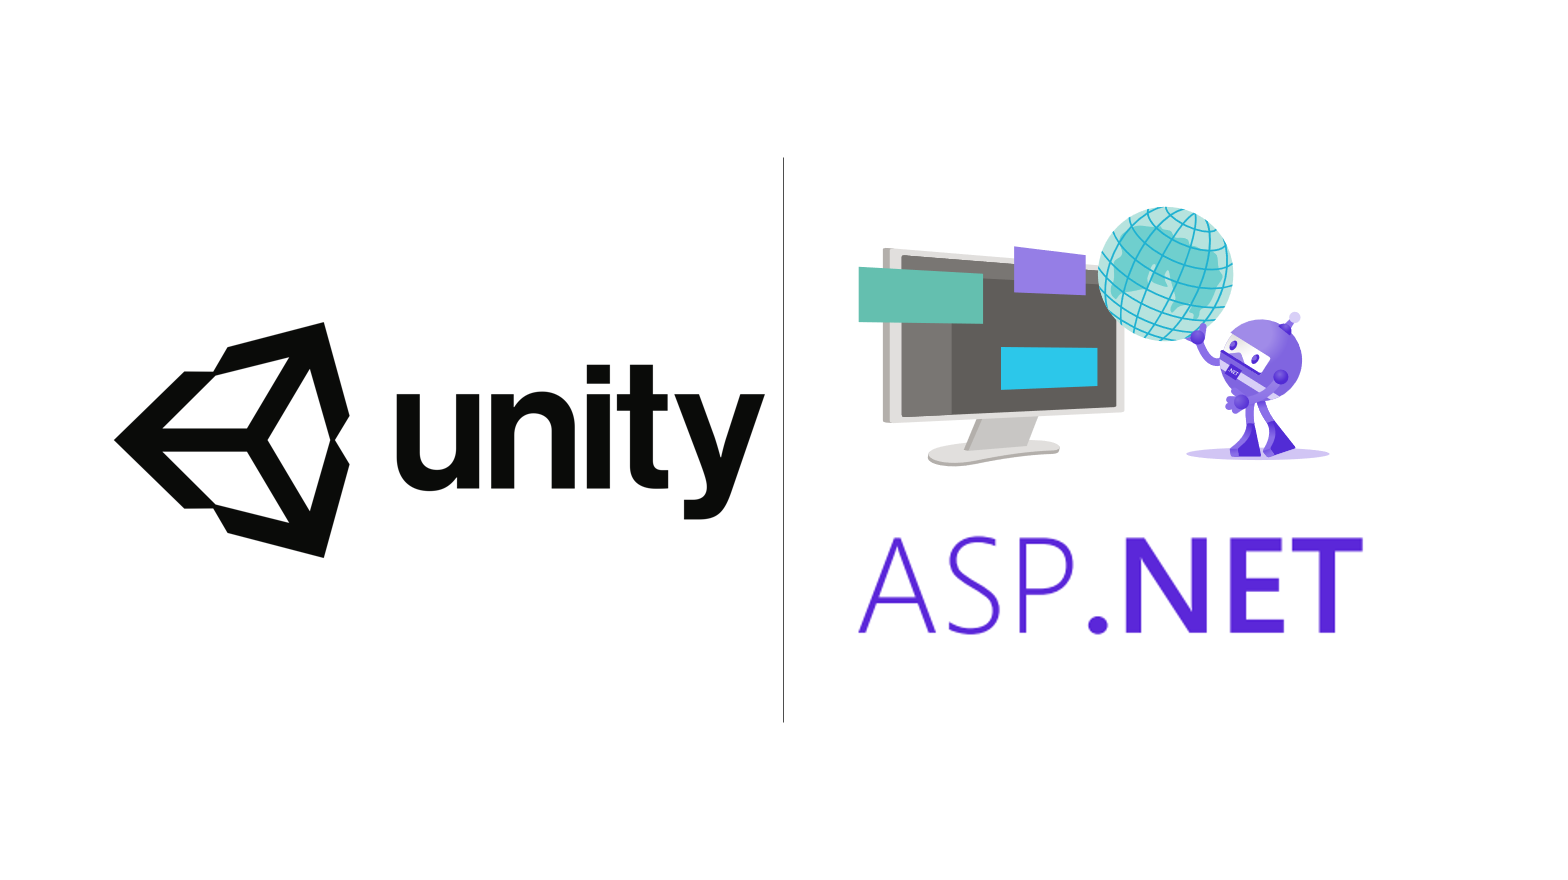 Unity logo and ASP.NET logo next to one another